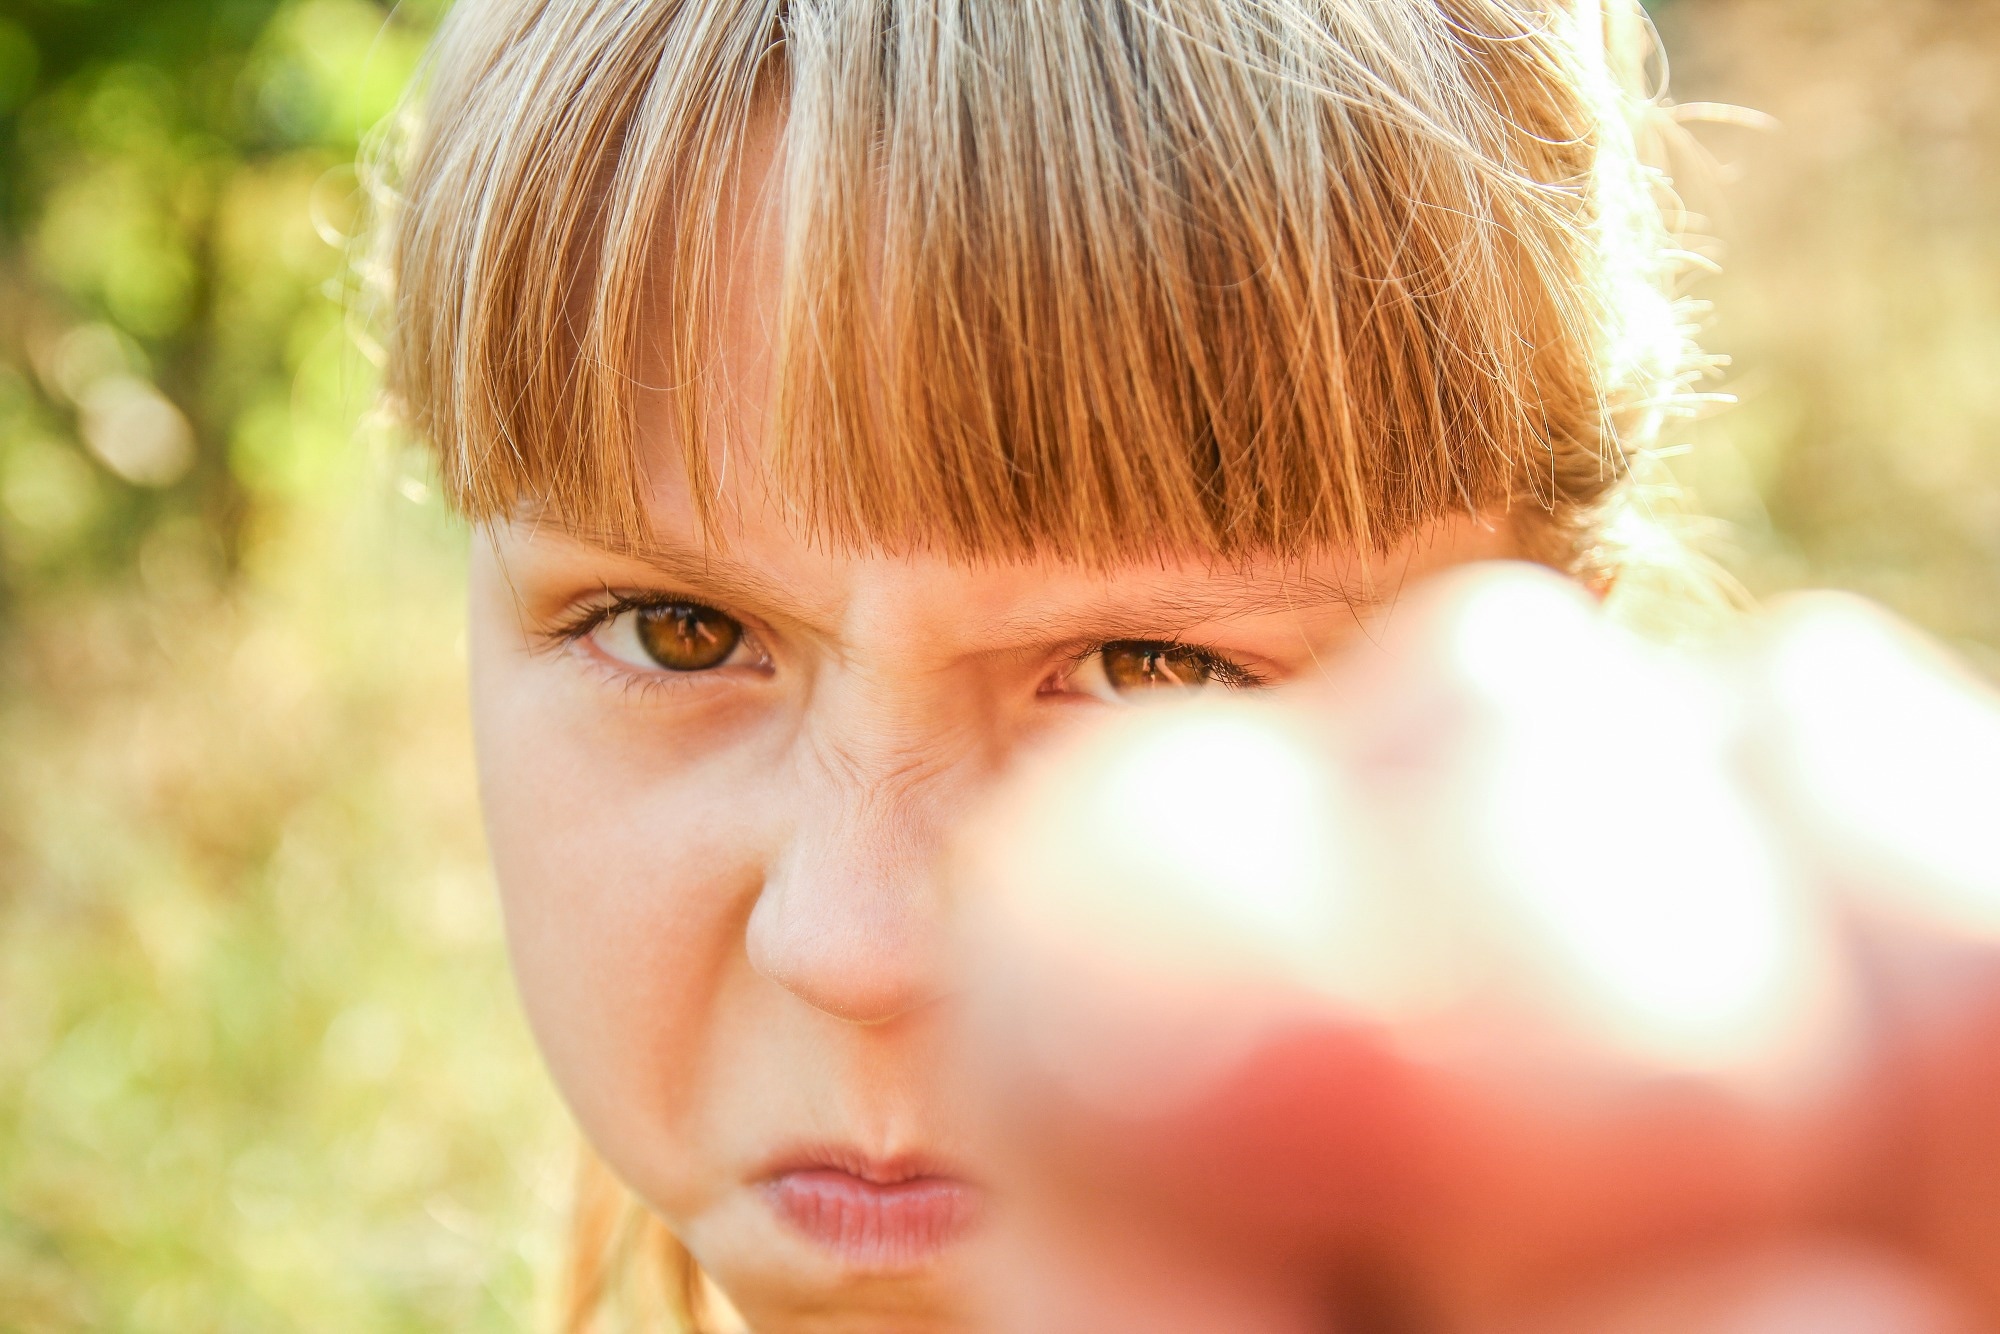 Study: Nutritional supplementation in the management of childhood/youth aggression: A systematic review. Image Credit: KonstantinChristian / Shutterstock